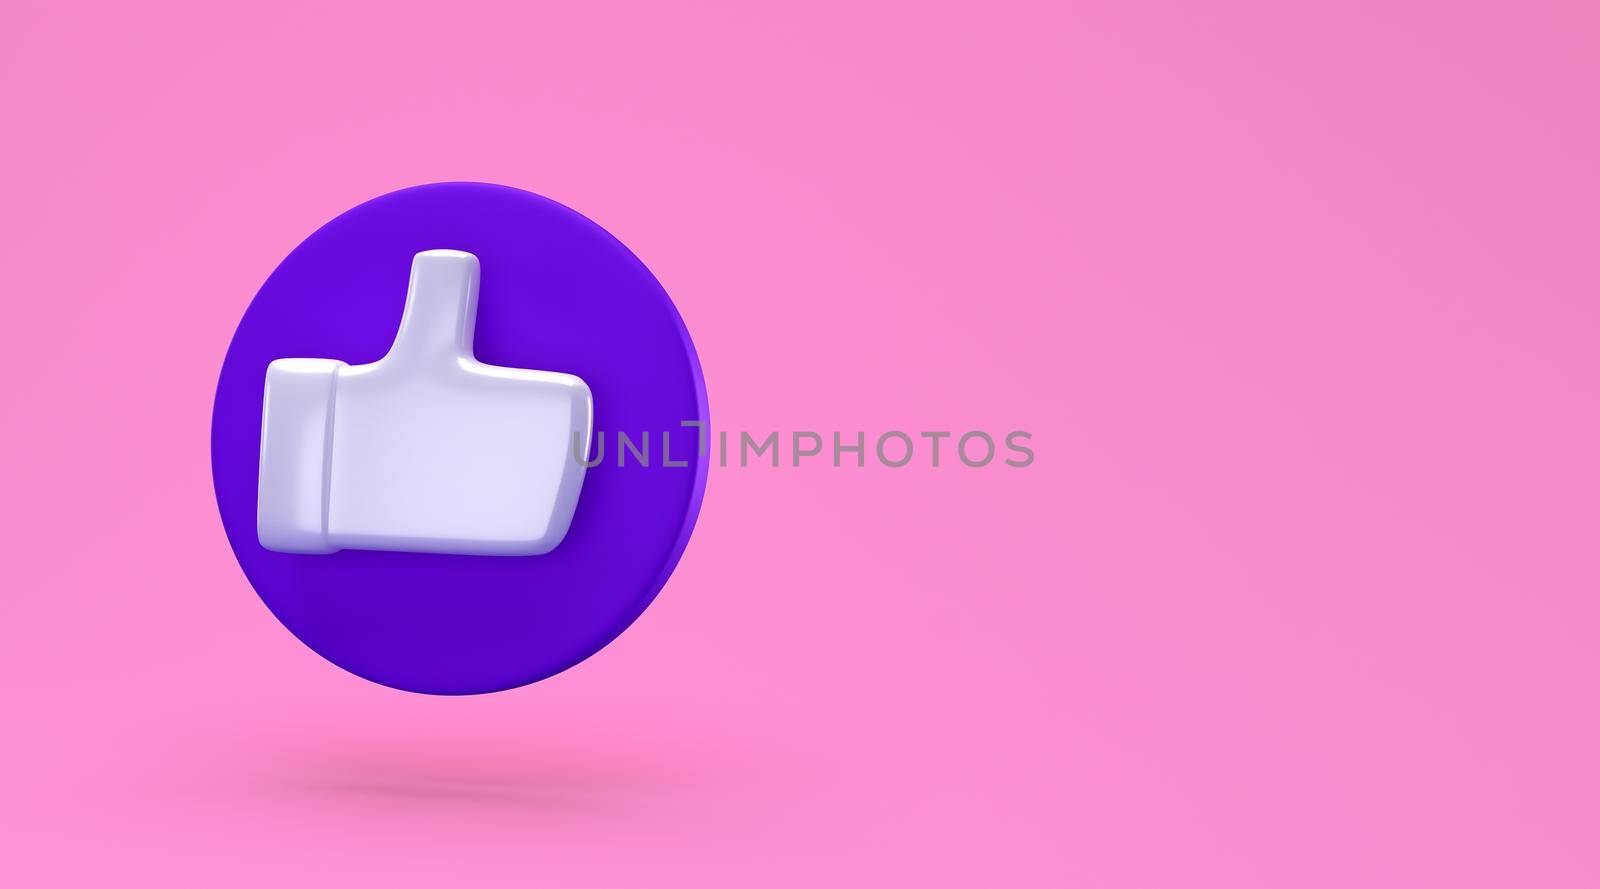 Social like minimal concept. 3d render. Like icon on a blue circle isolated on background. 3d illustration Thumbs up button